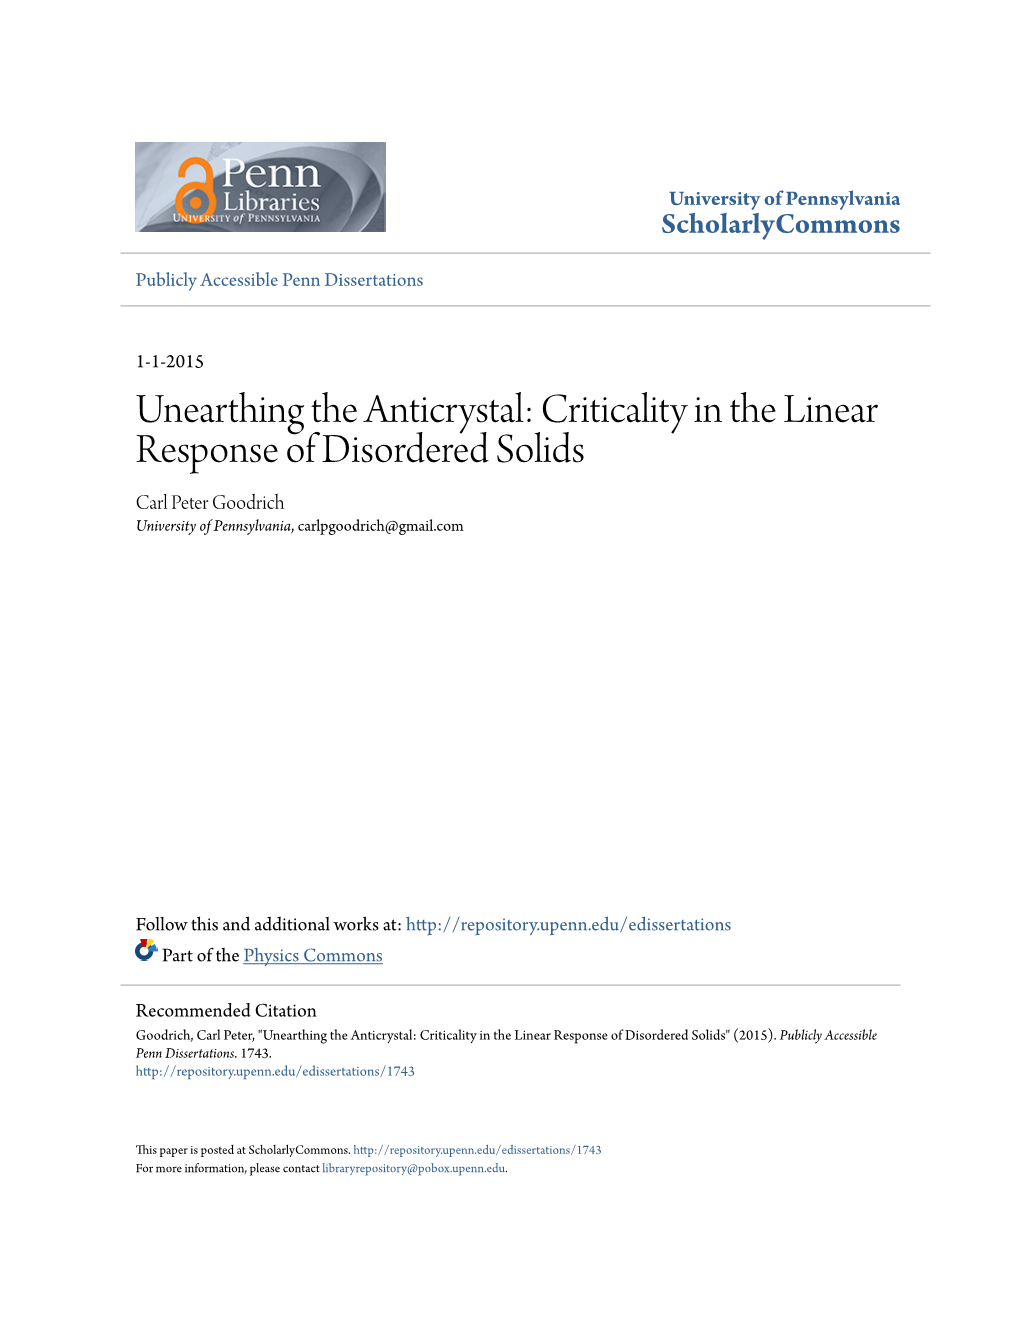 Criticality in the Linear Response of Disordered Solids Carl Peter Goodrich University of Pennsylvania, Carlpgoodrich@Gmail.Com